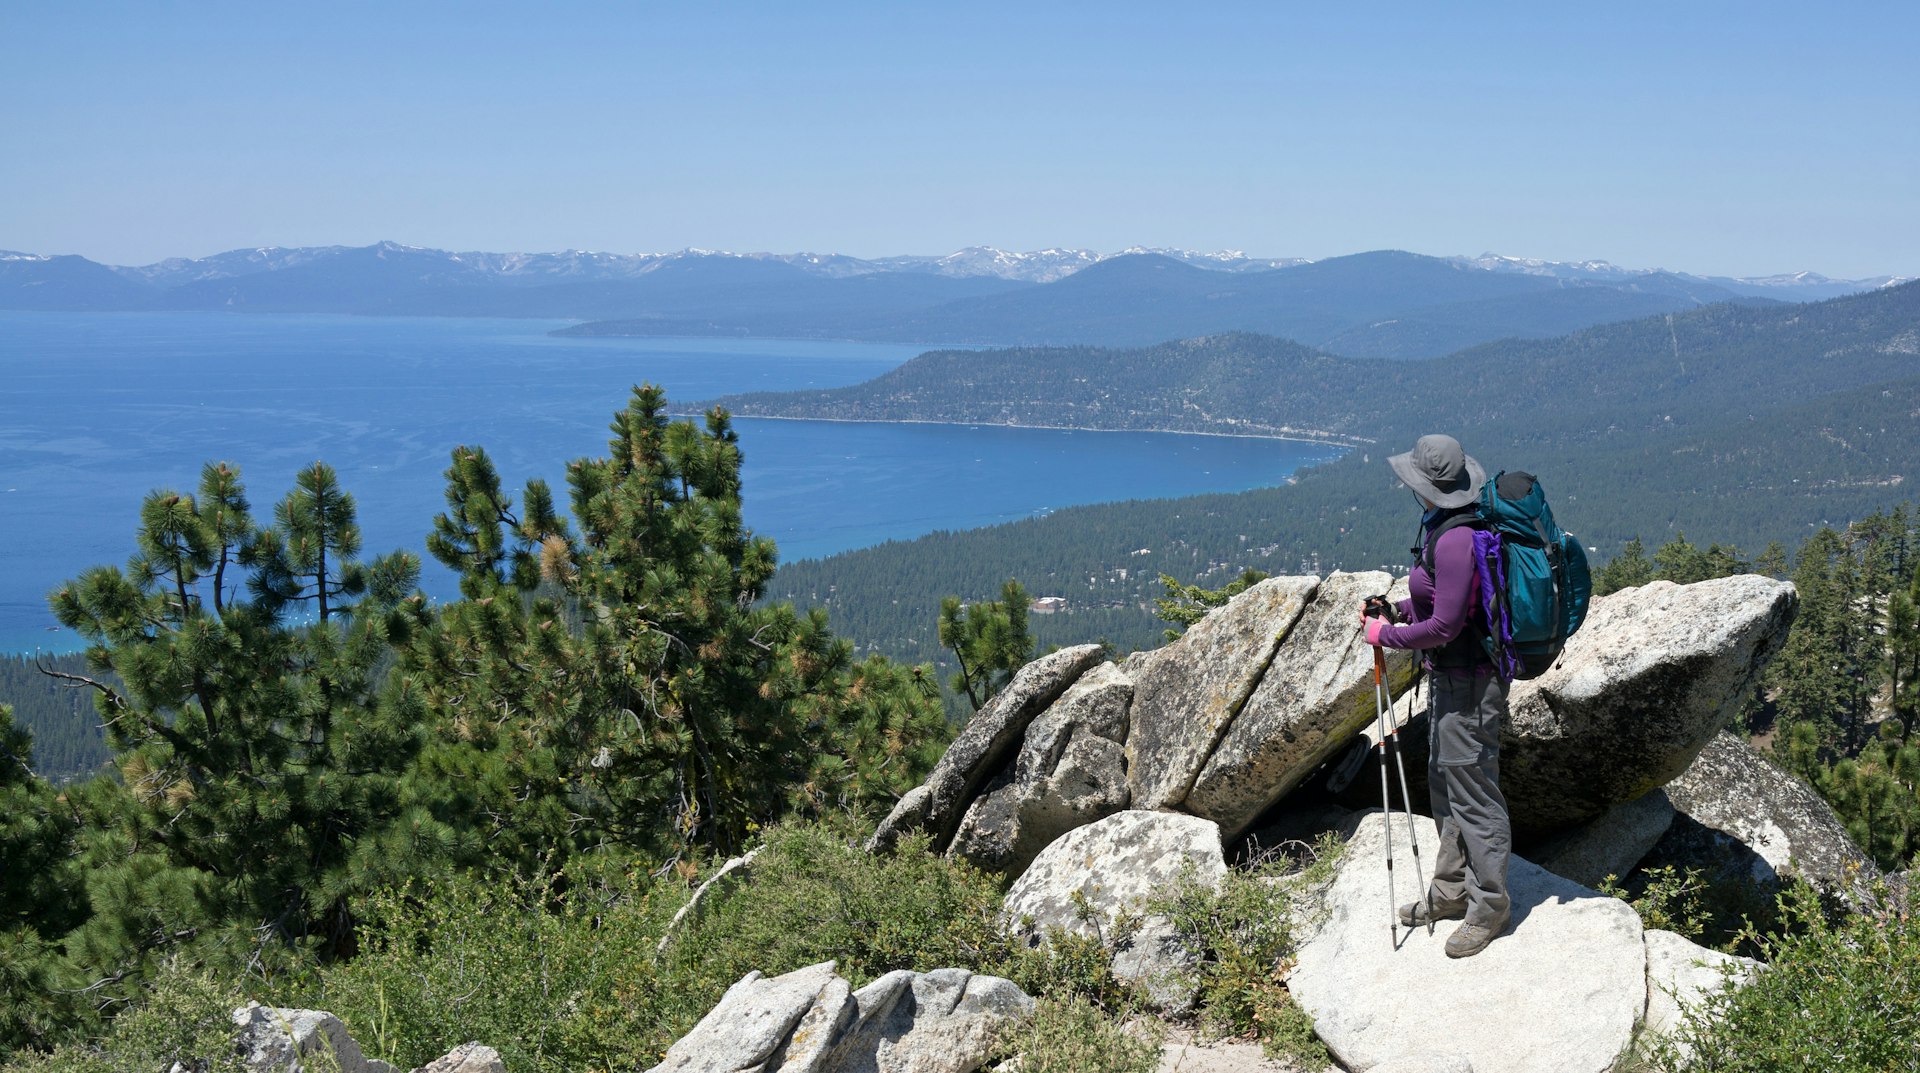 A hiker carrying a lot of gear pauses to look out over a lake view